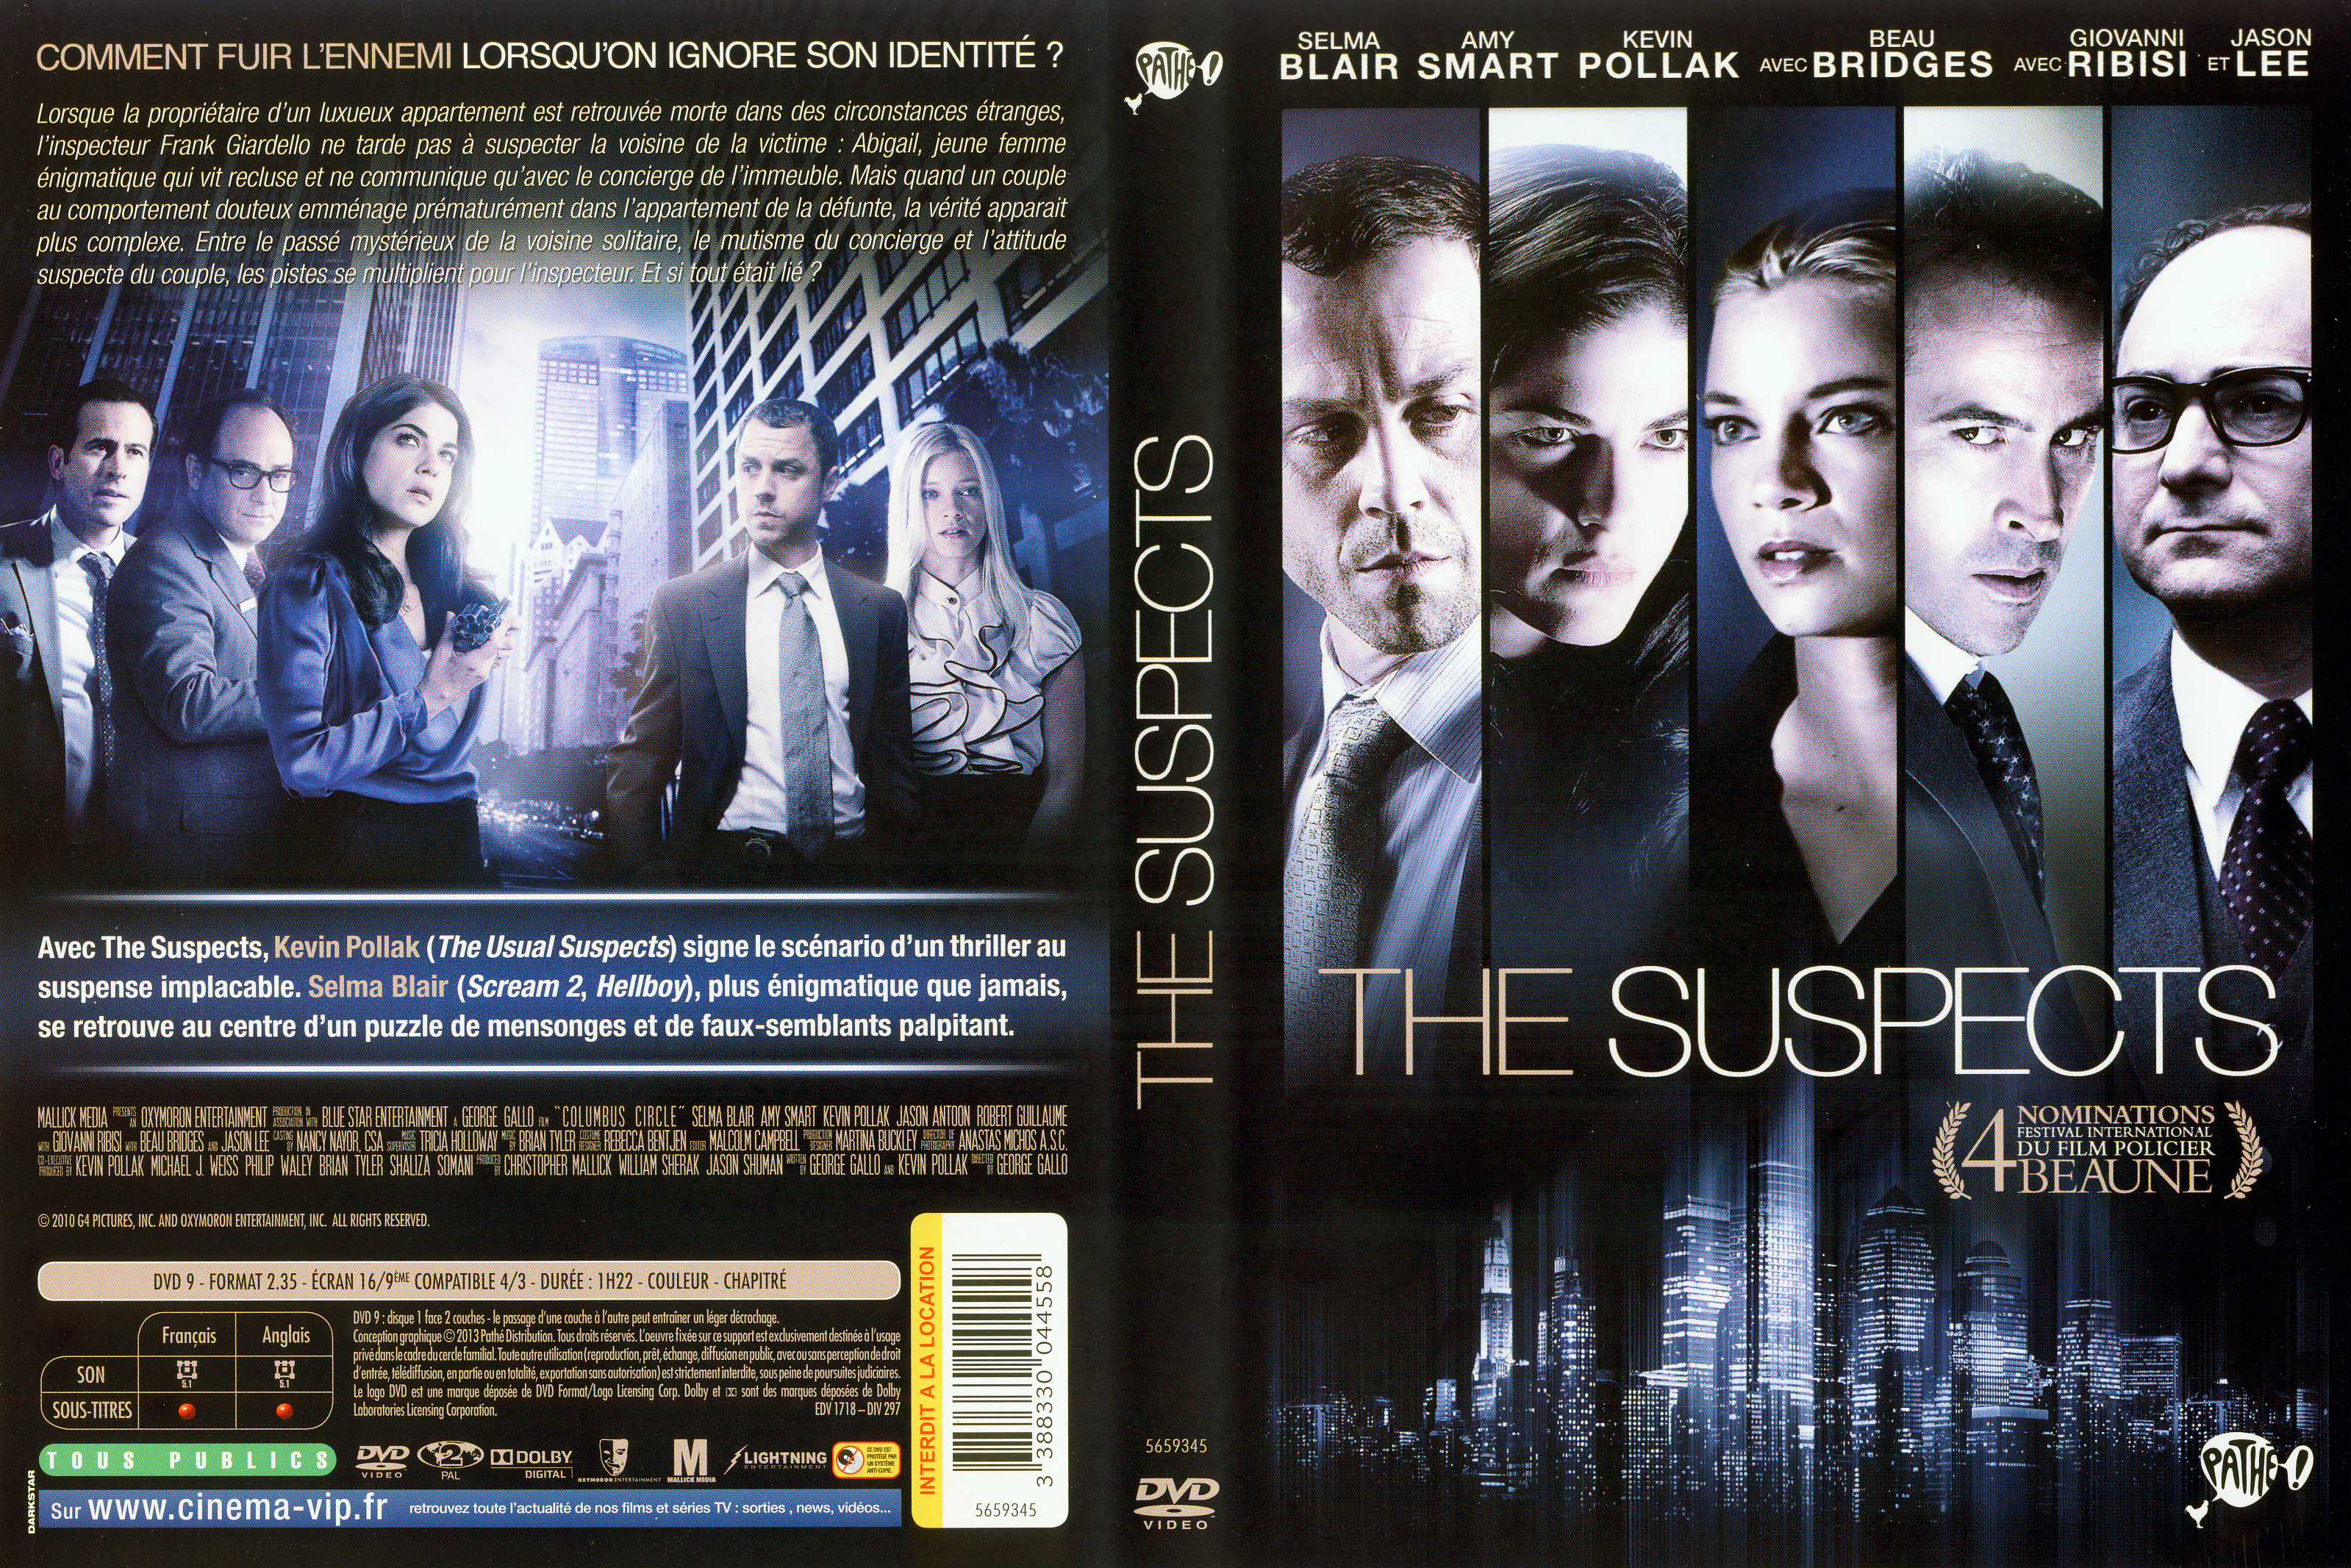 Jaquette DVD The Suspects